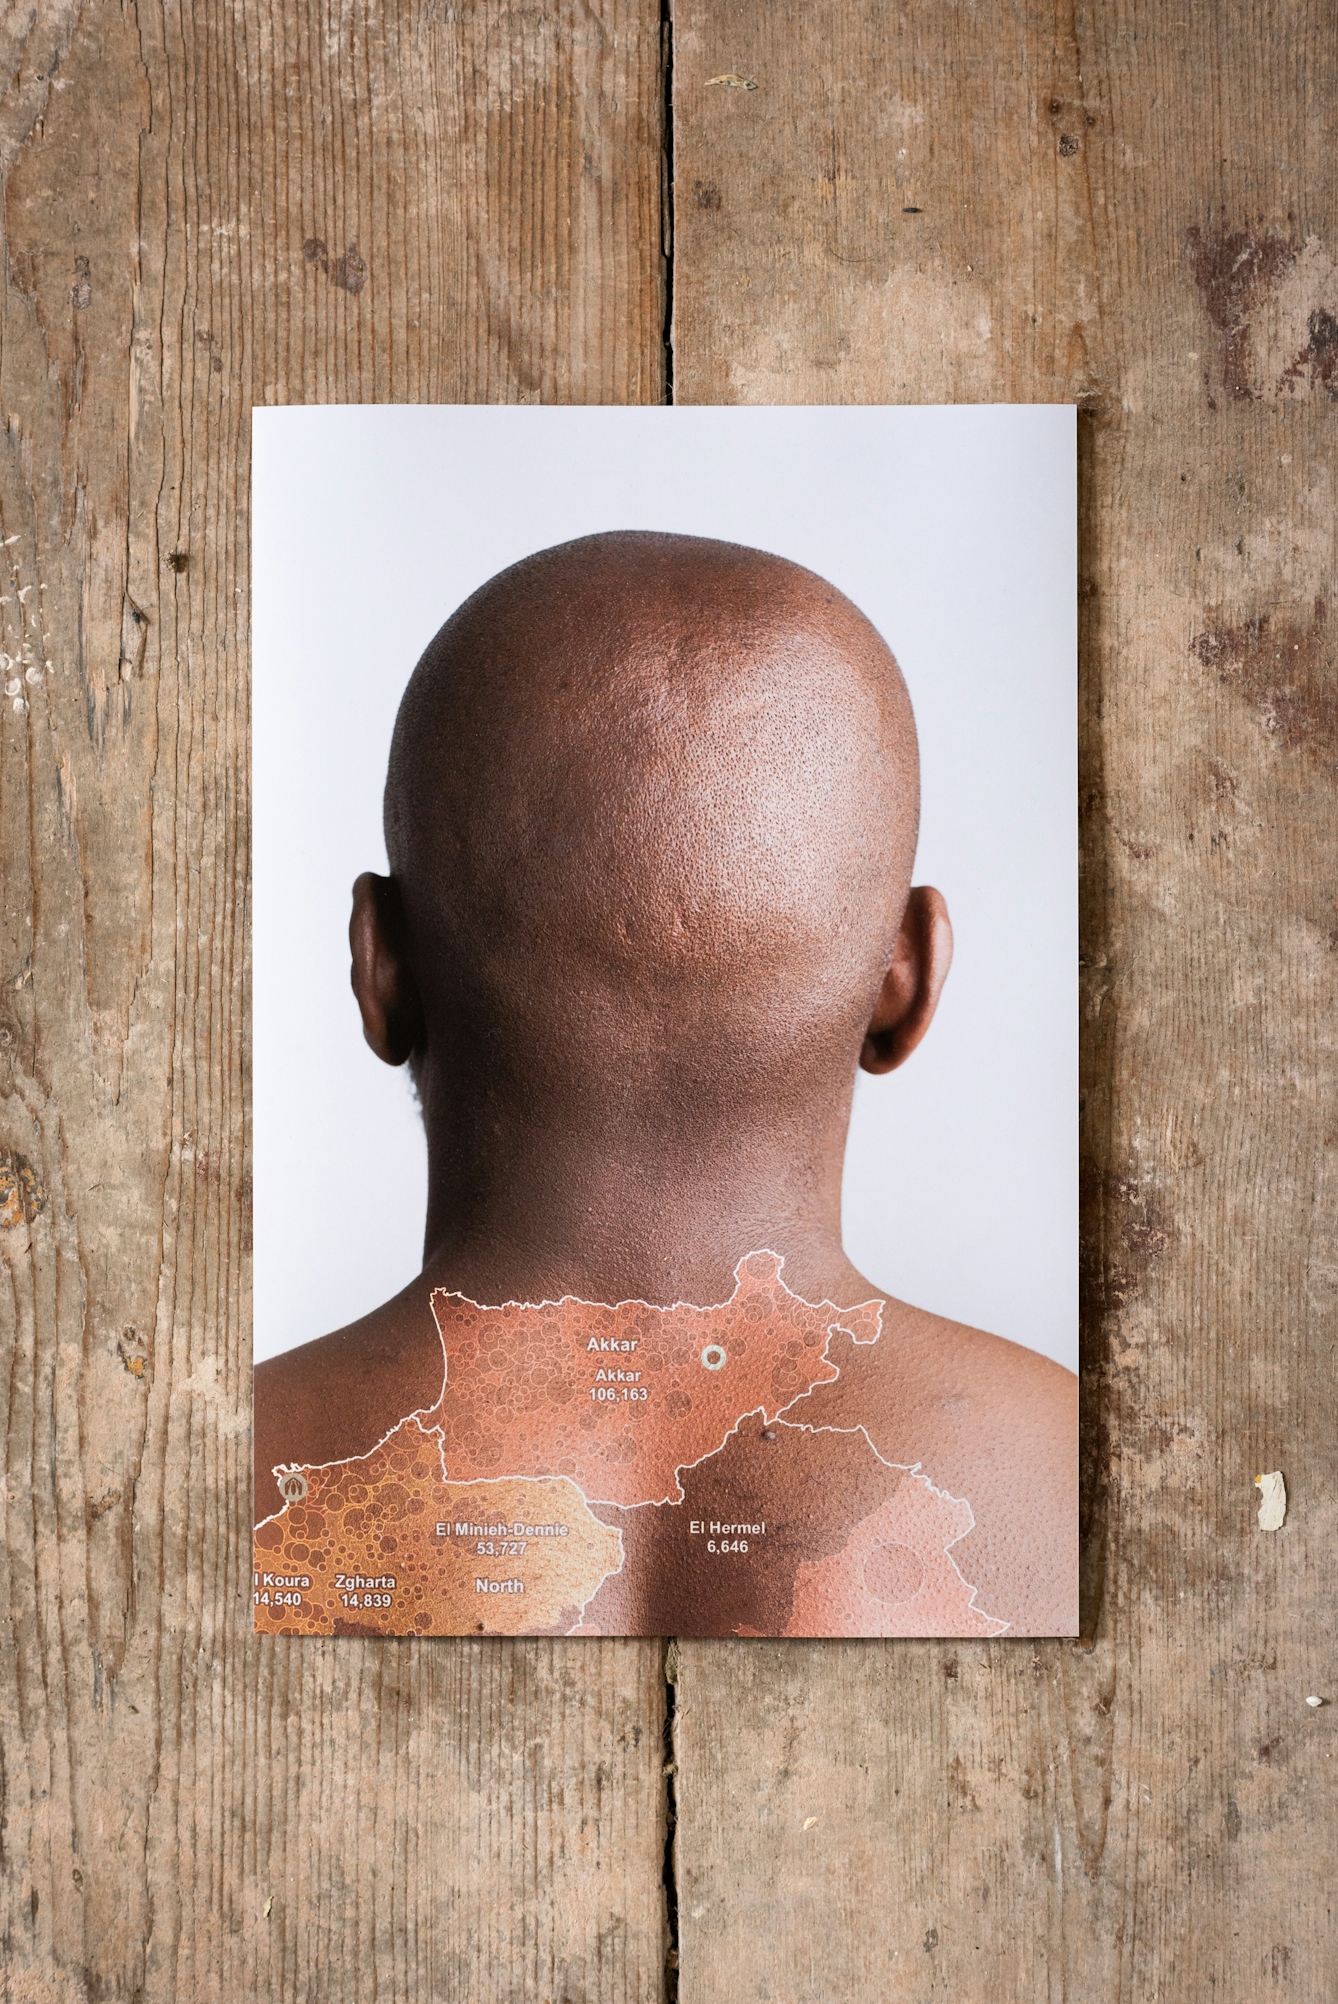 Photograph of a photographic print on a weathered, paint spattered wooden floor. The print shows the naked back of a man's head and neck against a white background. Superimposed on his back is a simple line map in white, yellow and orange, outlining different regions.